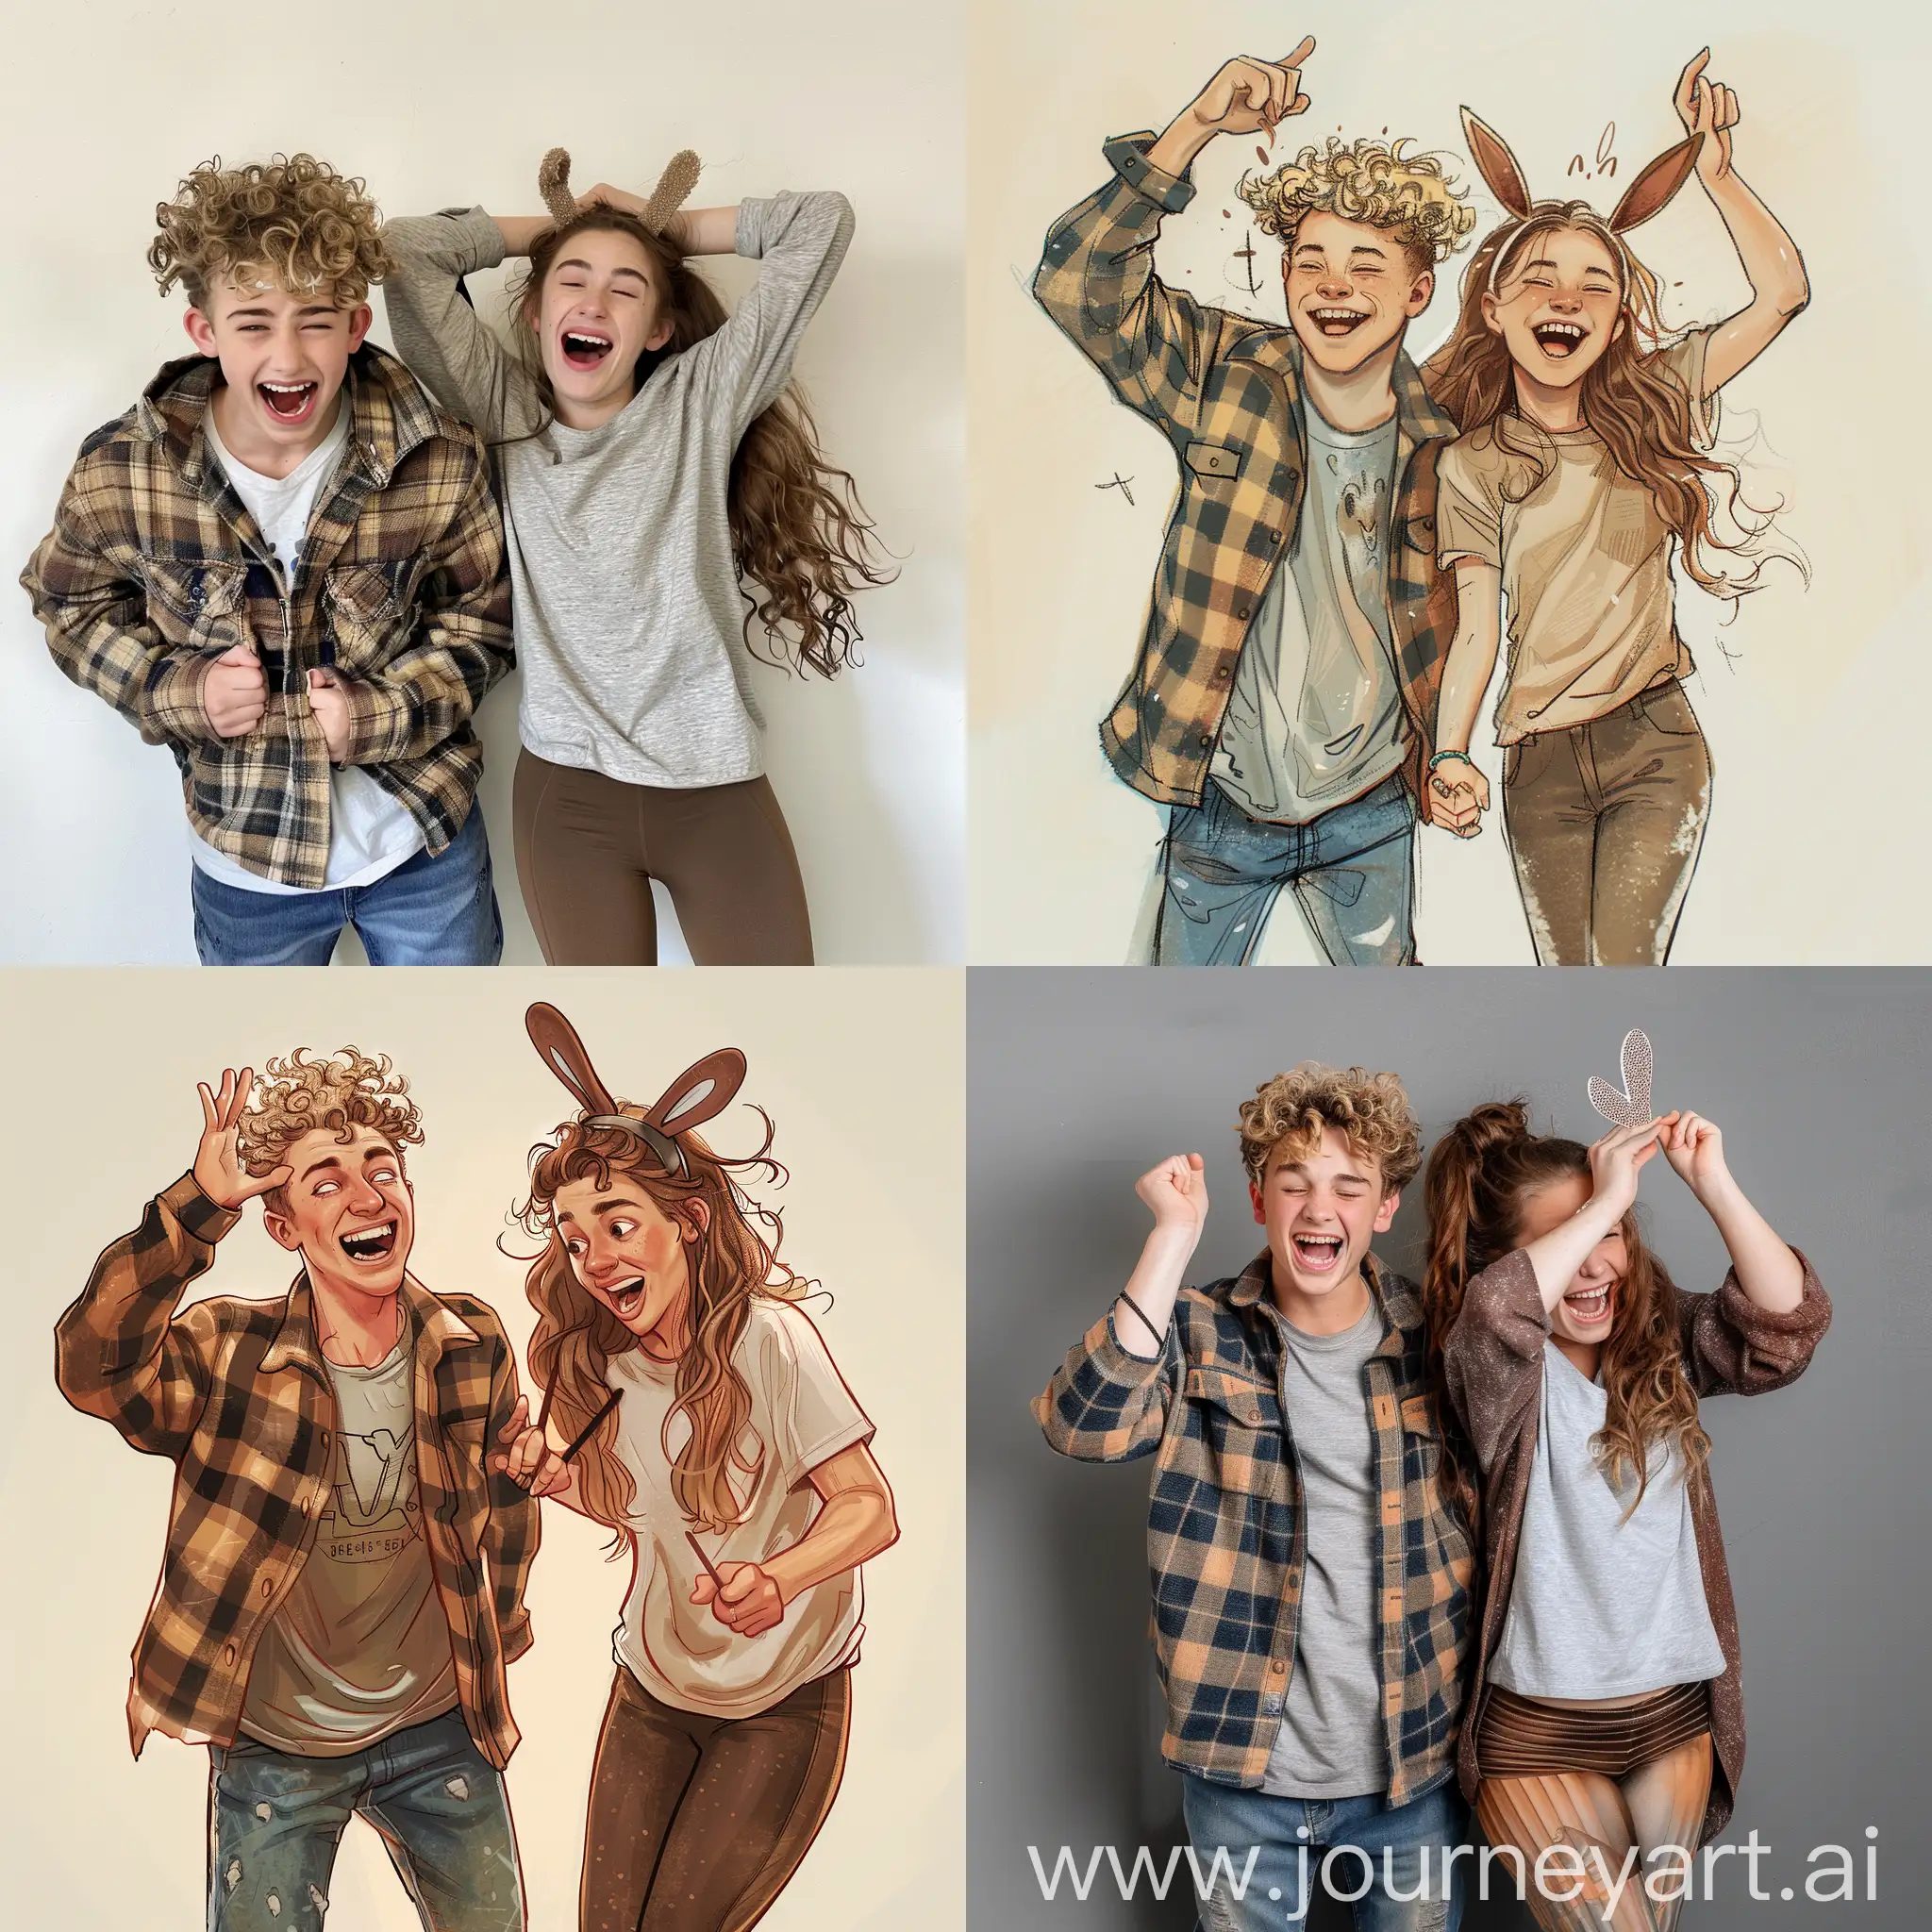 18 year old boy, short curly blonde hair, looks like walker scobell, wearing flannel jacket, wearing jeans, beside him is a girl, brown long hair, hair in a high ponytail, brown eyes, 18 years old, wearing a t-shirt, leggings, both of them are making funny face, laughing, giving the other person bunny ears behind their head